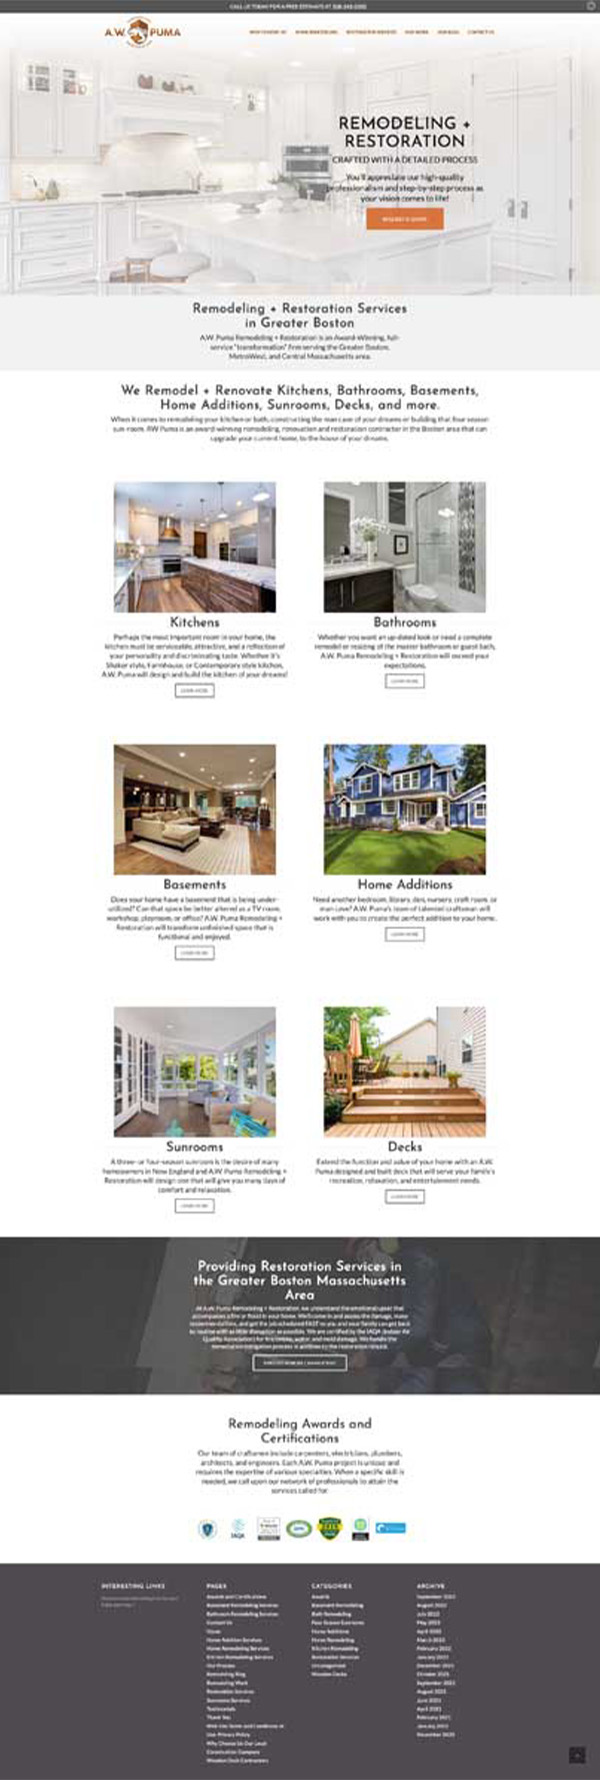 Construction Company Website Re-design Scroll Example